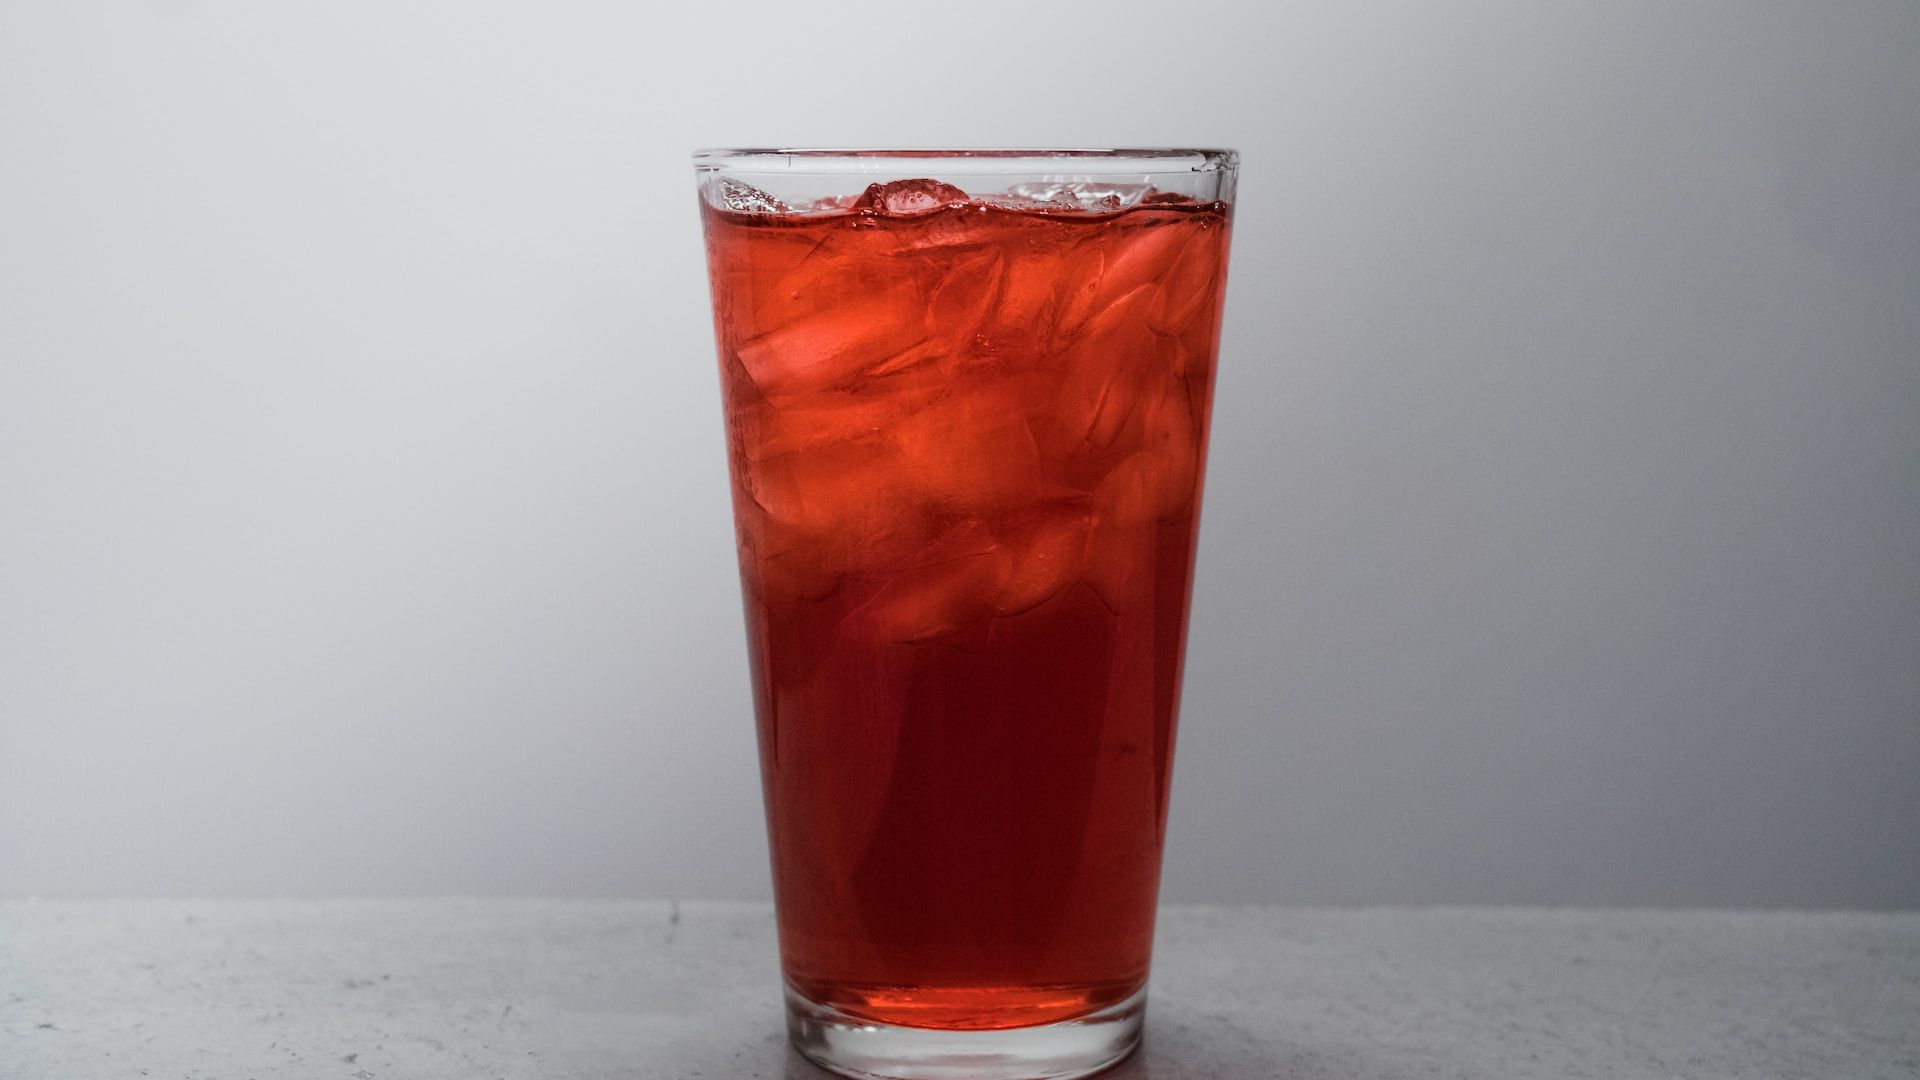 A glass of iced red tea